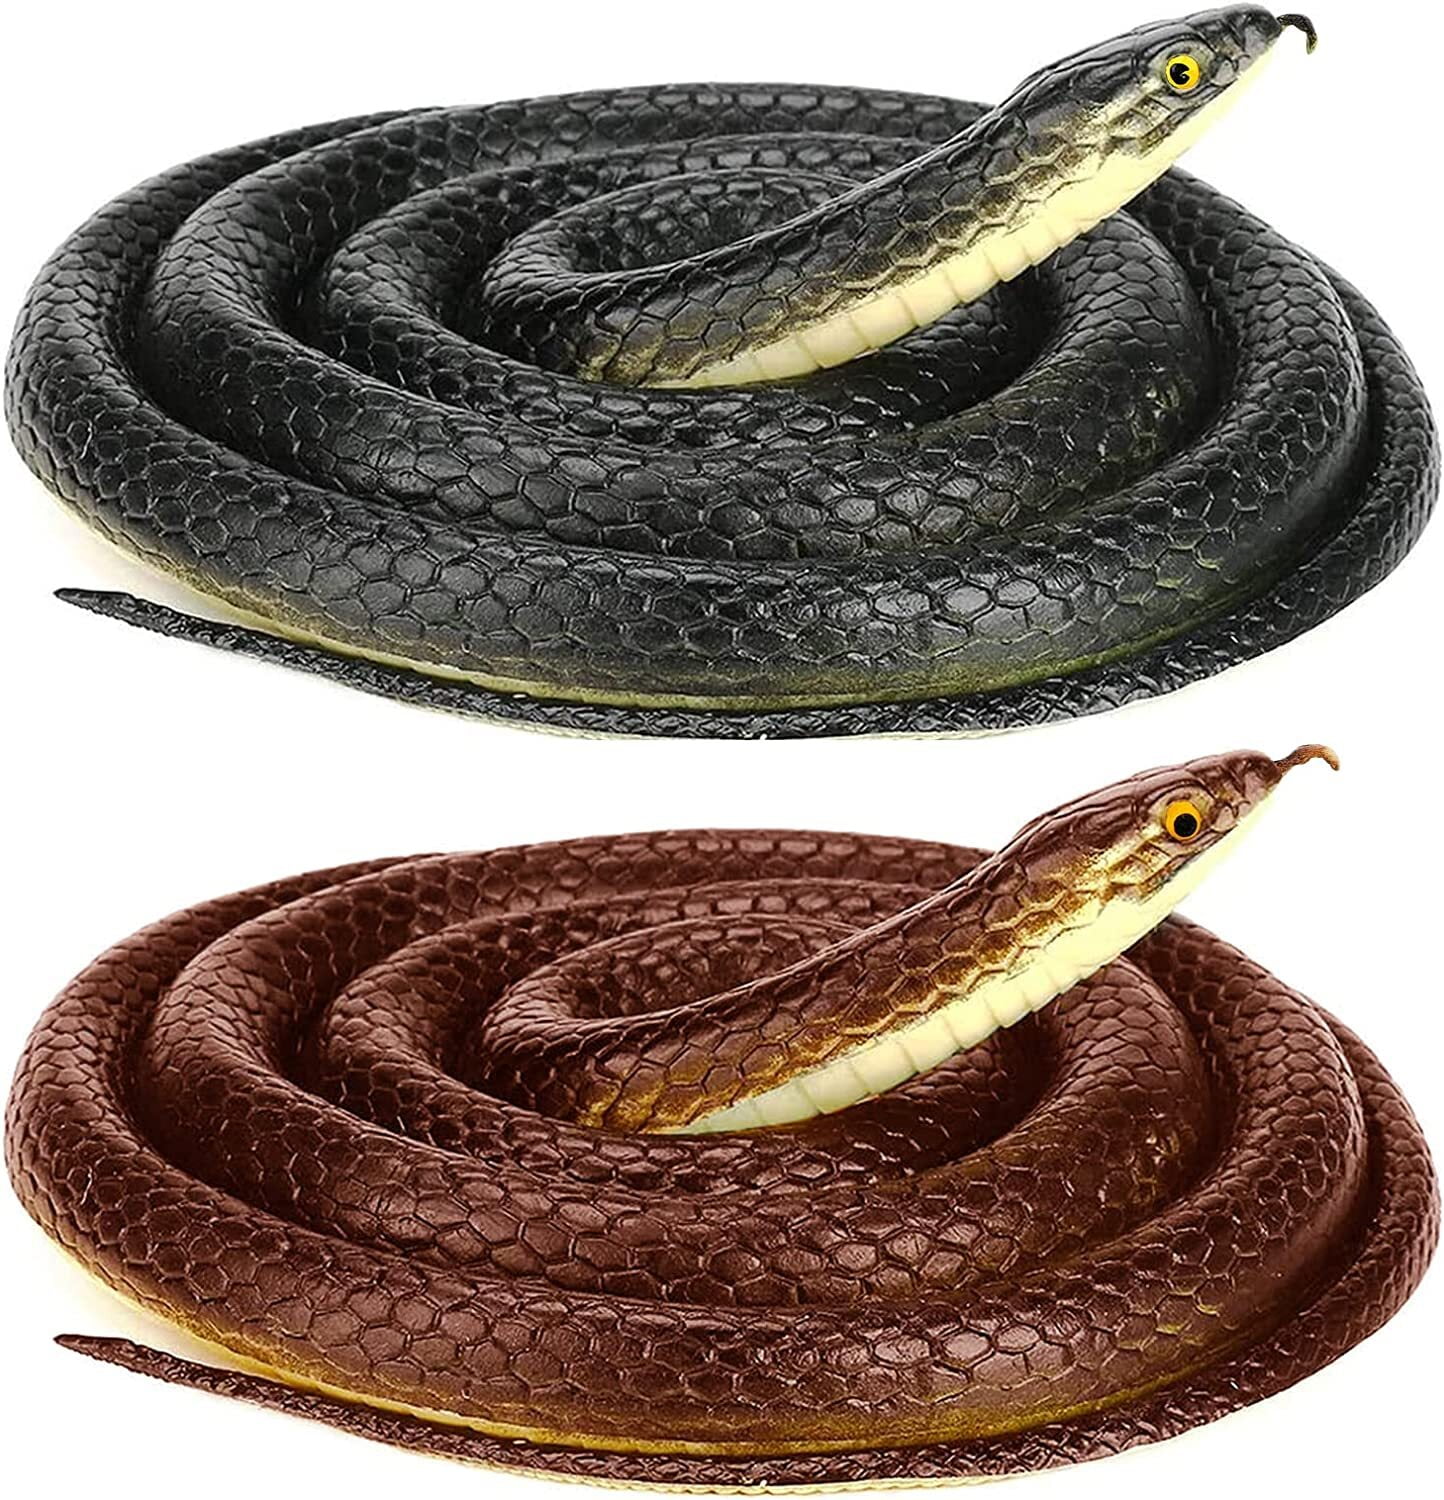 2 asst LARGE 24 IN RUBBER SNAKES realistic fake play snake TOY REPTILE NEW  gags